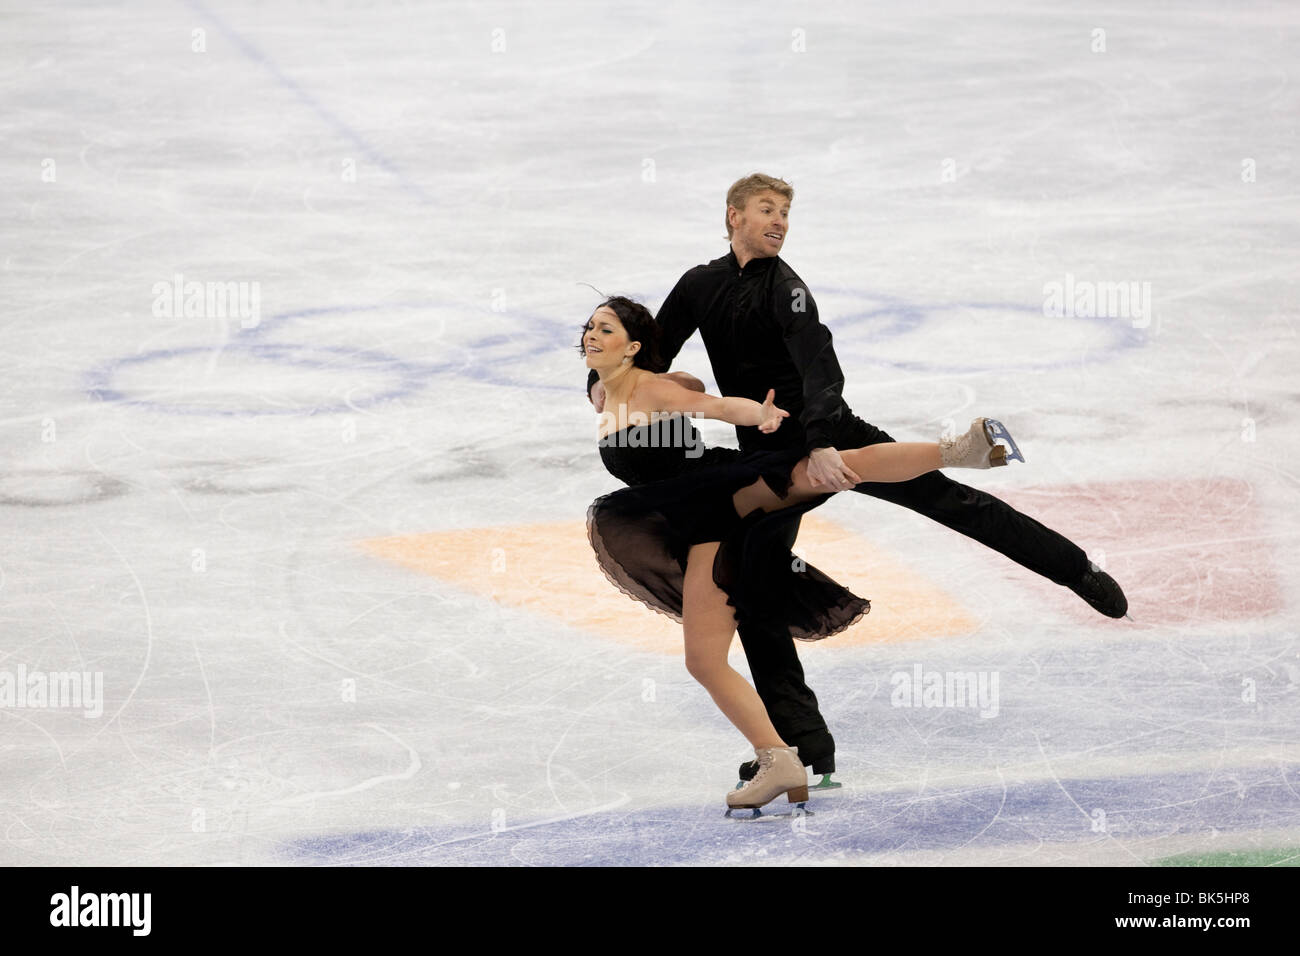 Isabelle Delobel and Olivier Schoenfelder (FRA) competing in the Figure Skating Ice Dance Original Dance at the 2010 Olympics Stock Photo